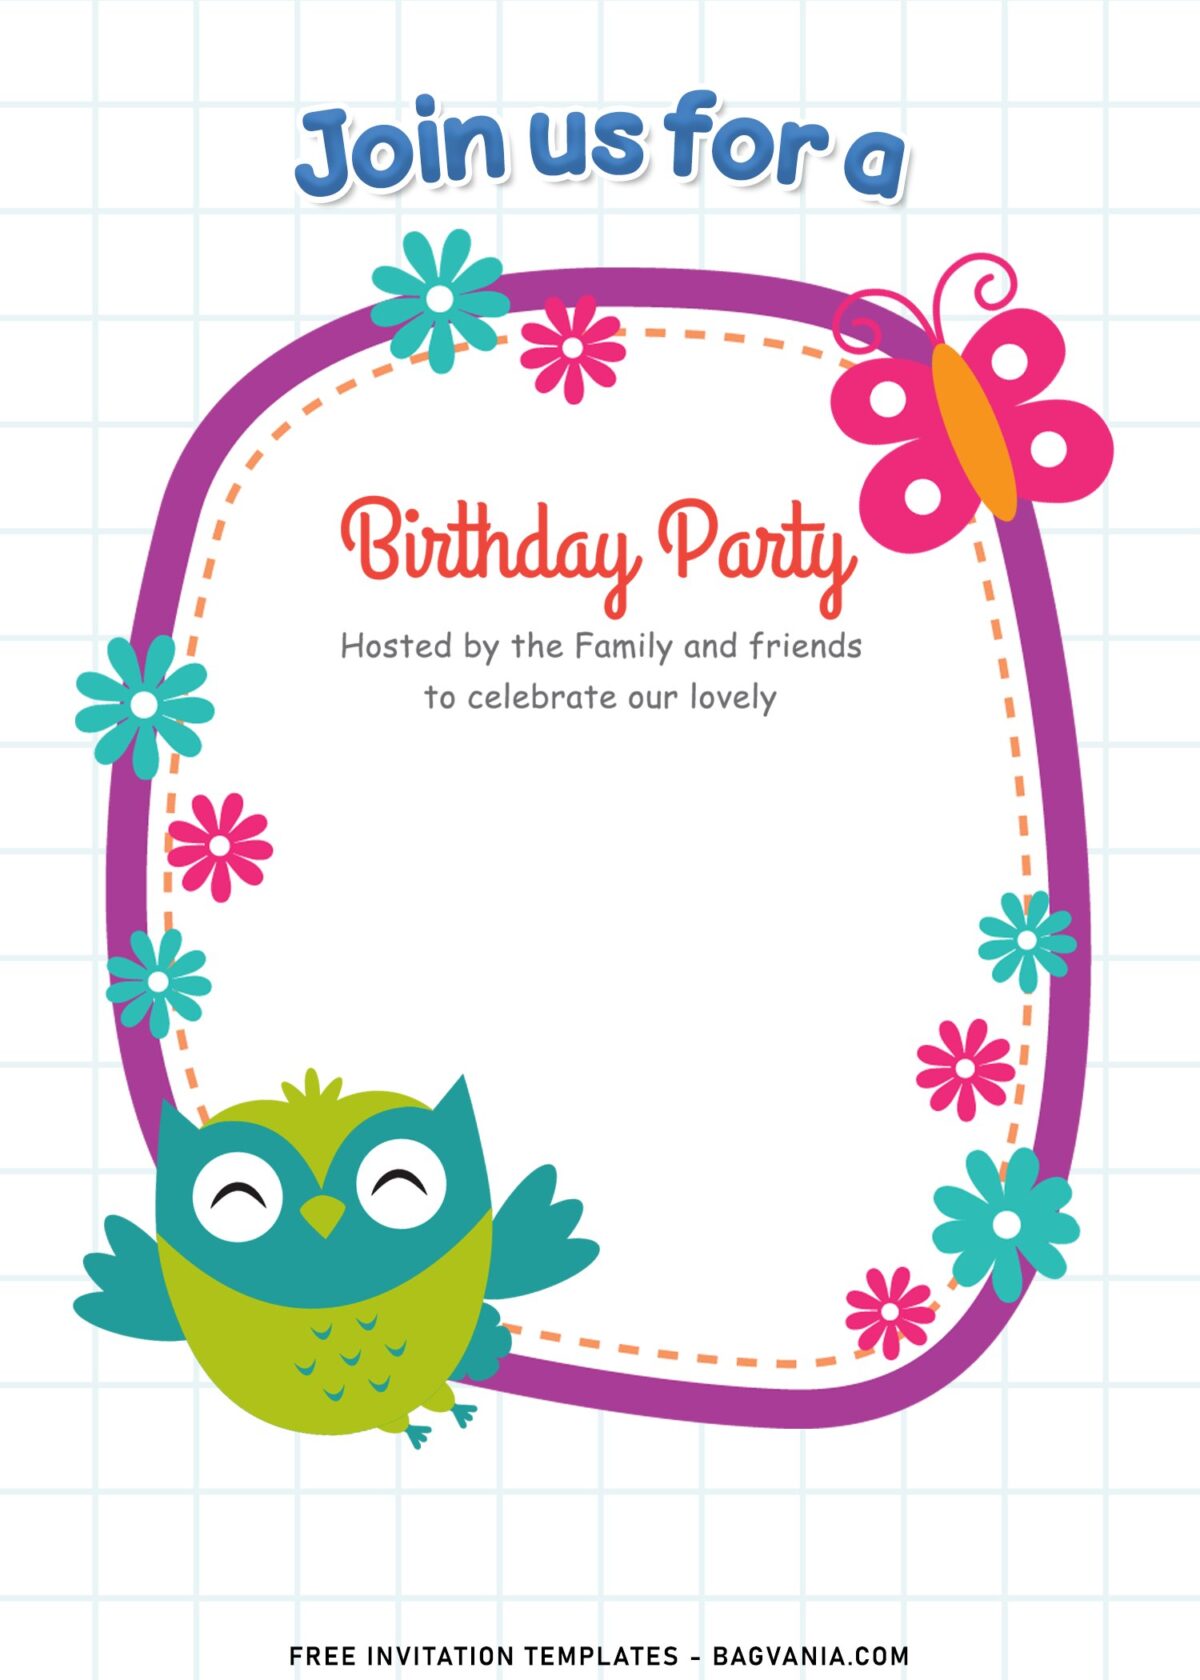 11+ Cute Owl Birthday Invitation Templates For Your Little Ones' Birthday with white background